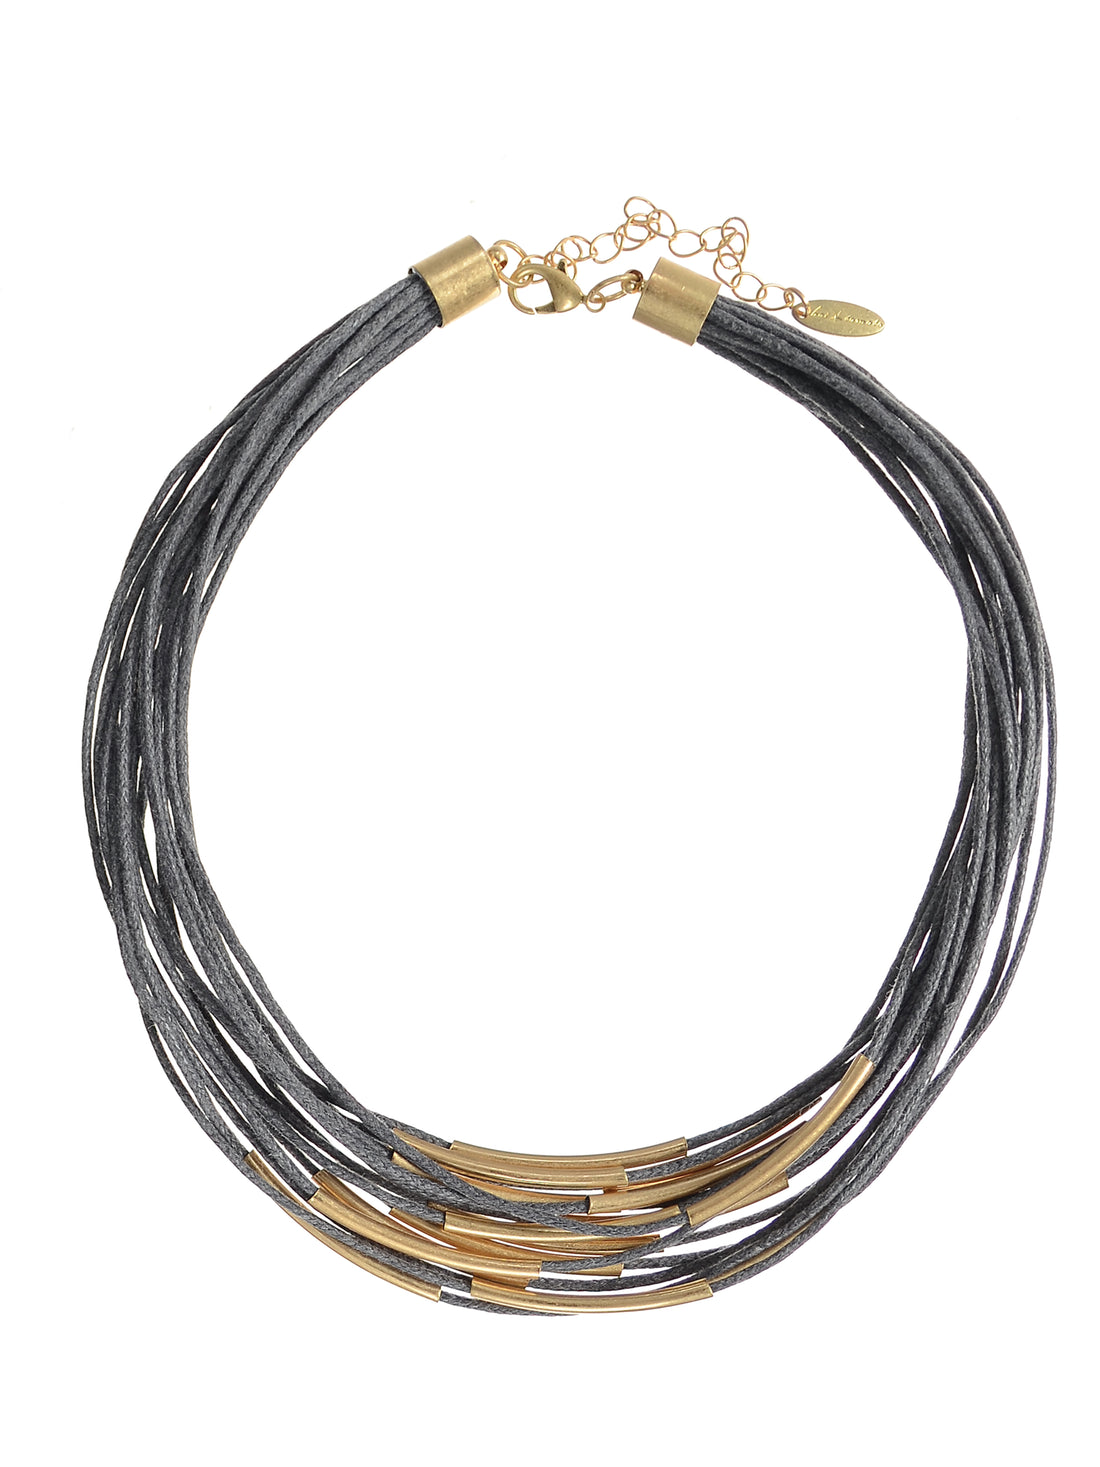 Multi Cord Tribe Necklace in Grey and Worn Gold - LF912